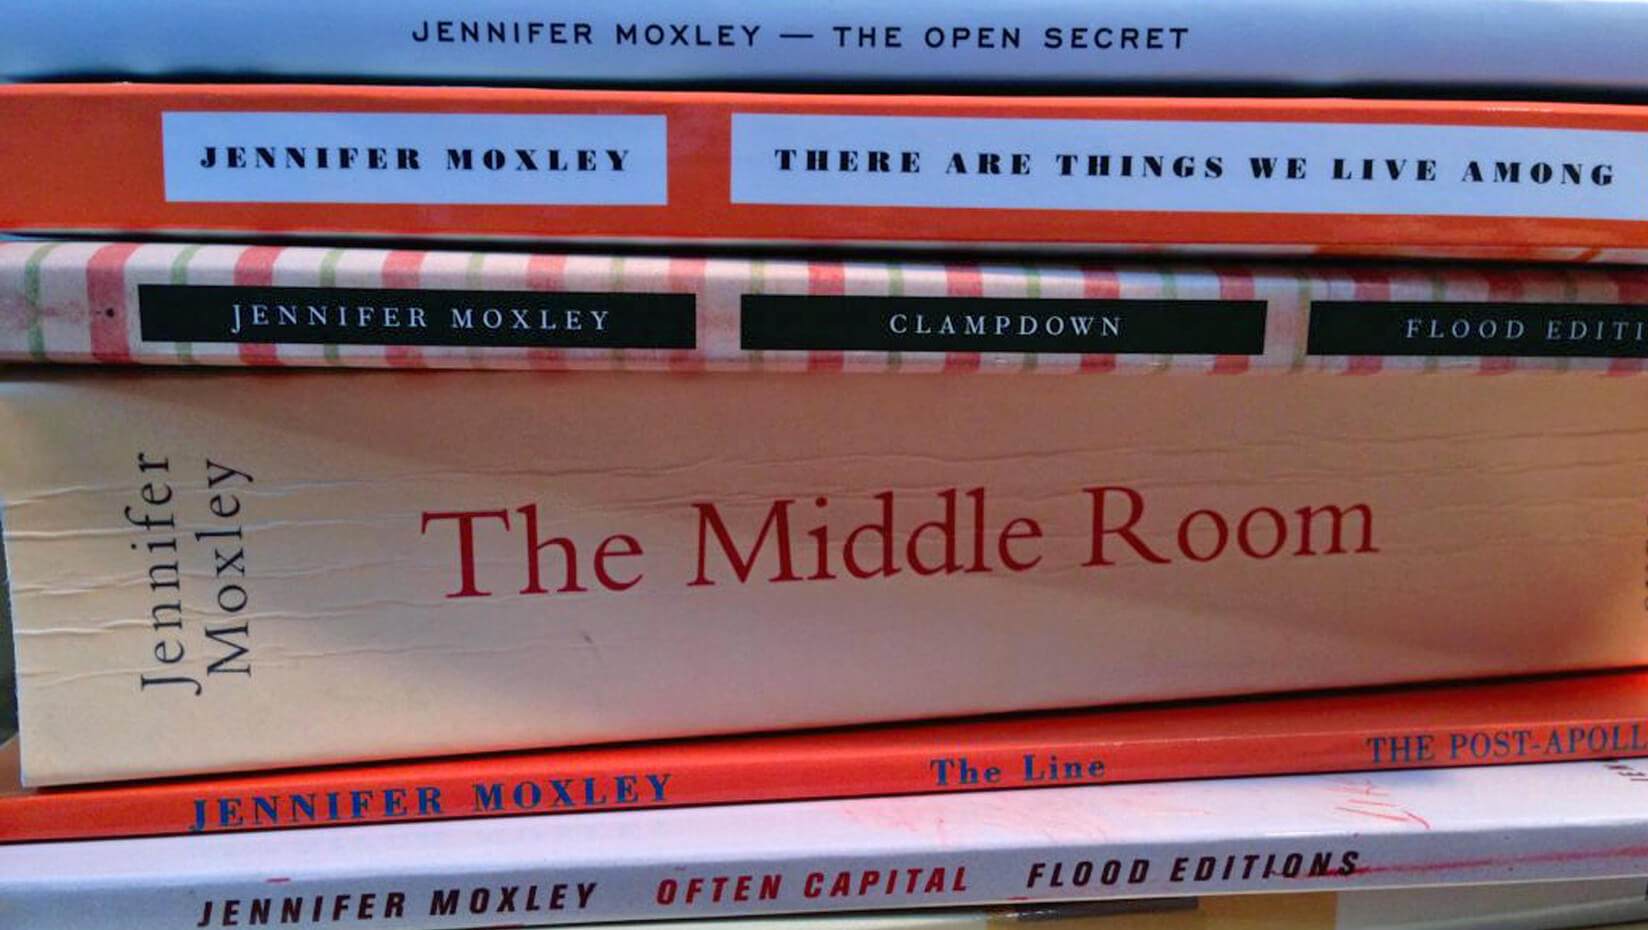 stack of books by Jennifer Moxley